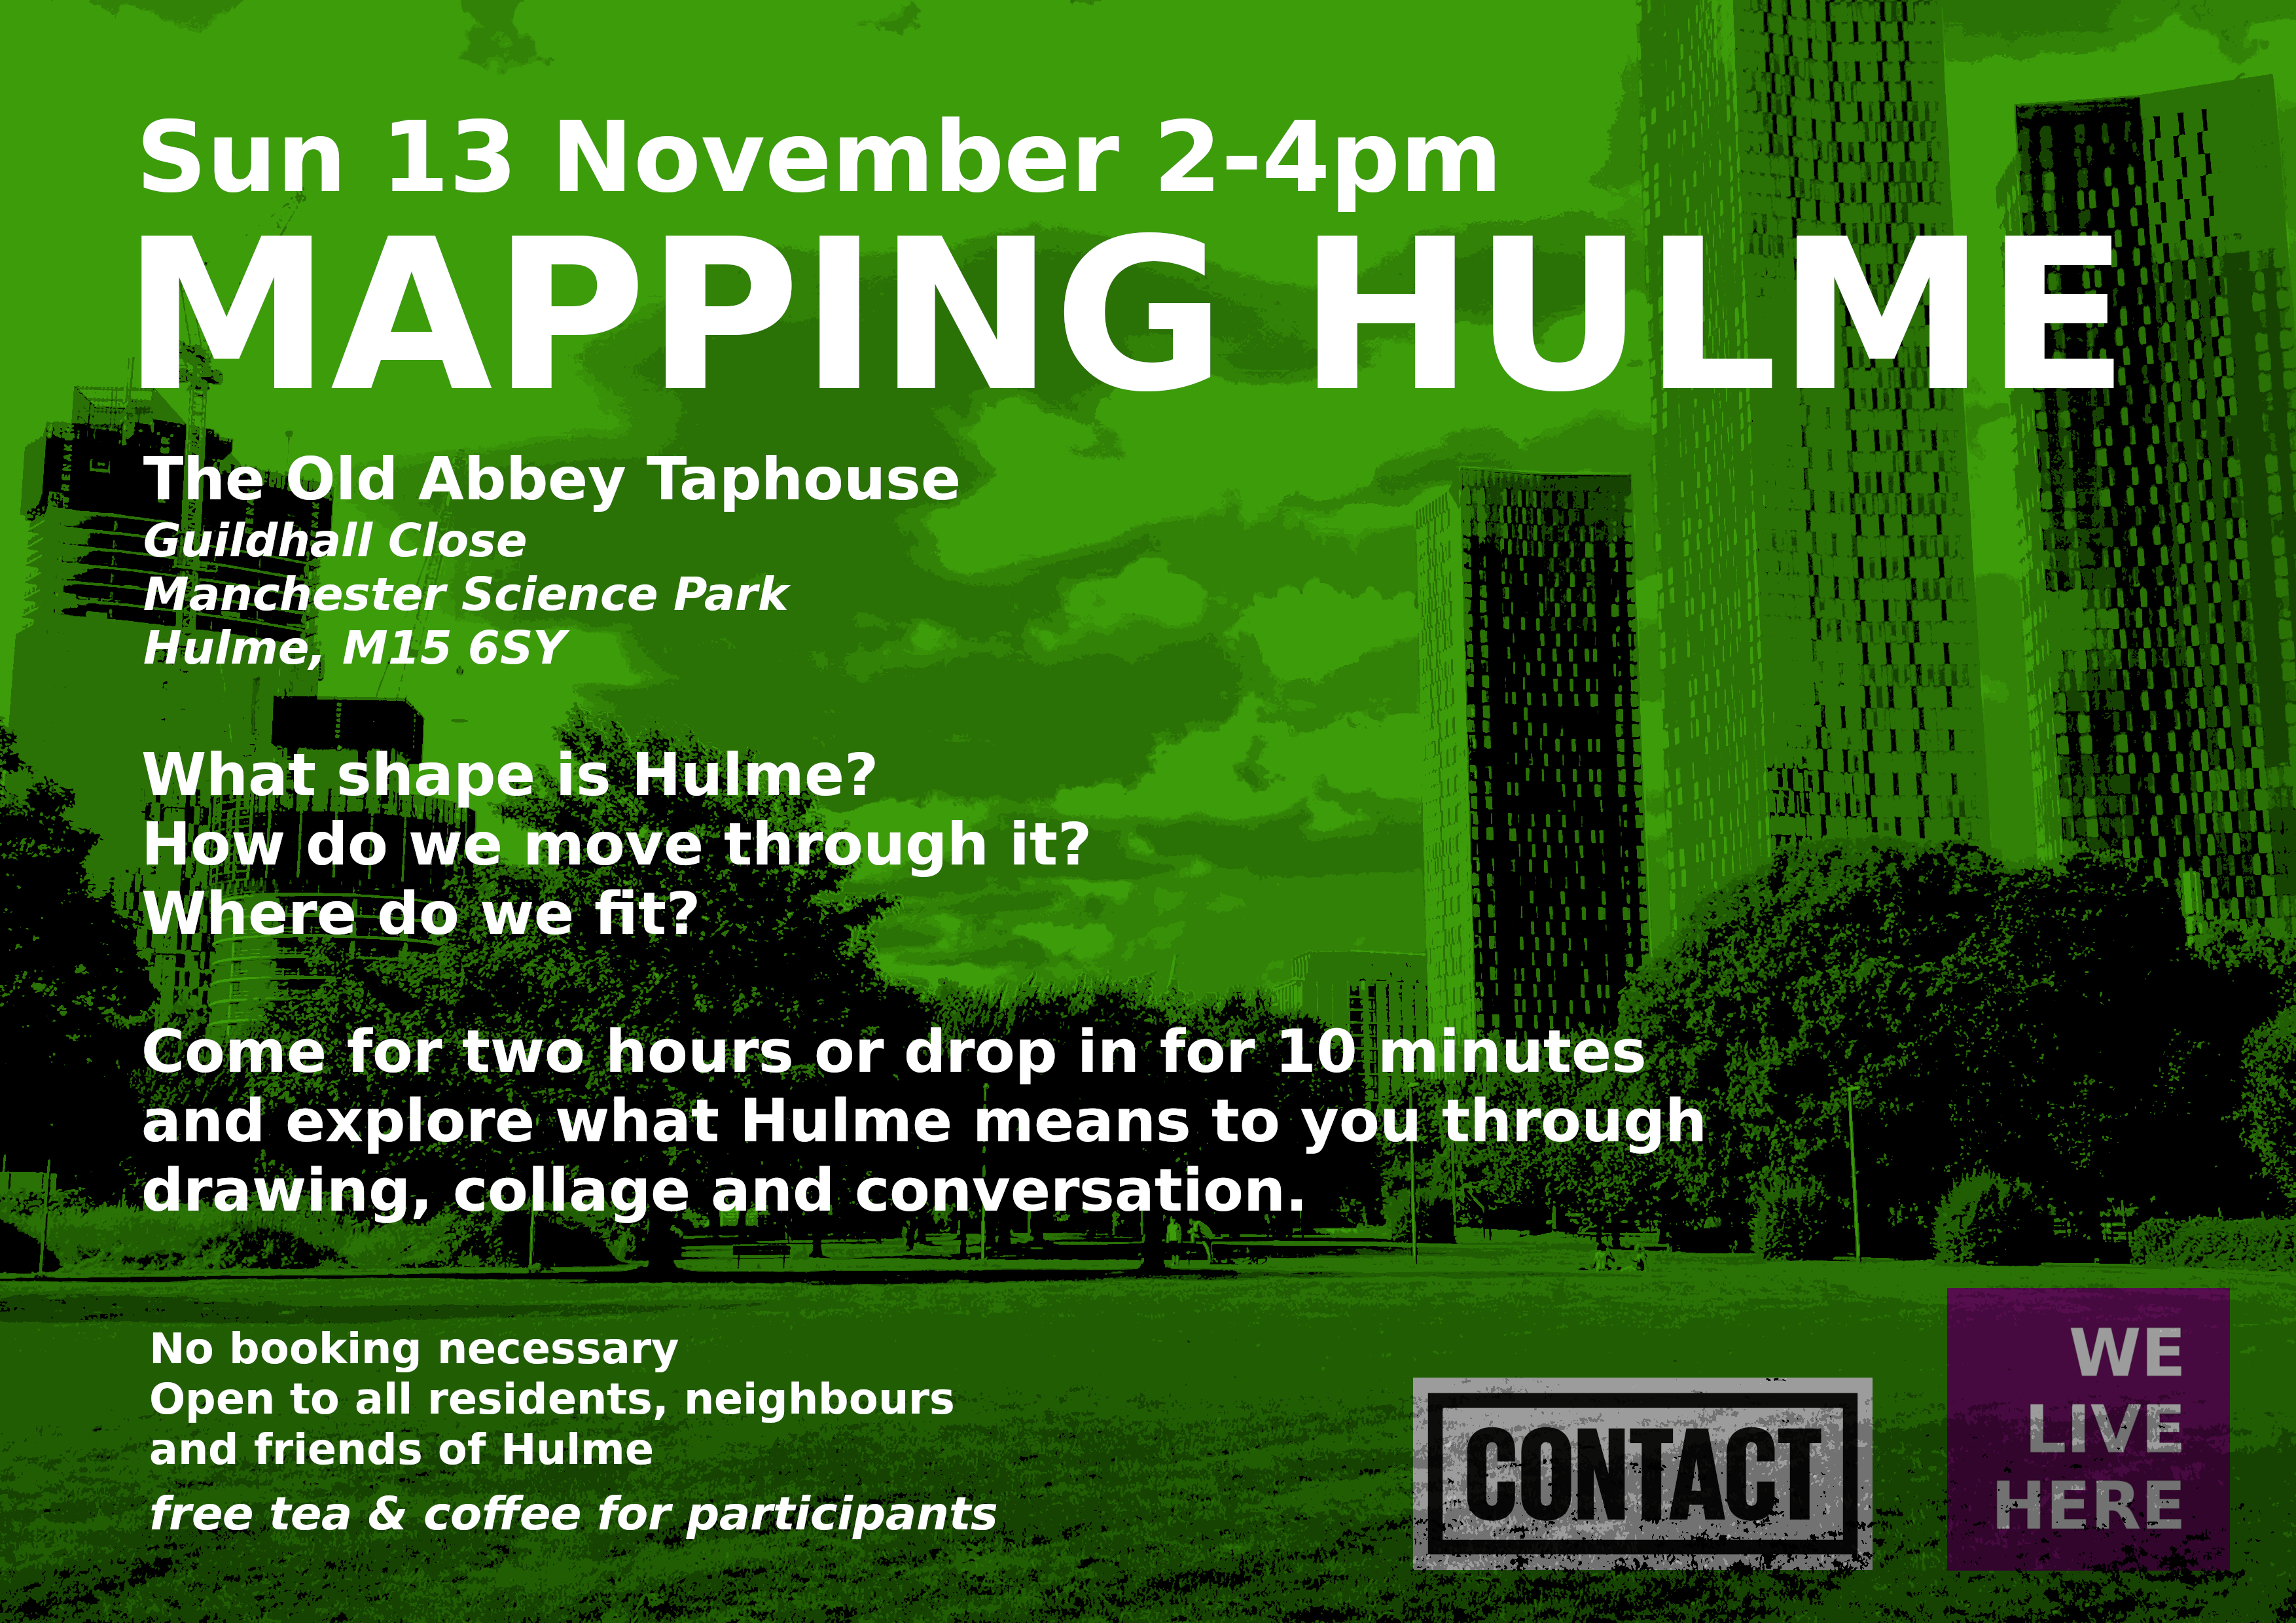 E-flyer for 'Mapping Hulme'. Photo of Hulme Park, with a green tint, overlaid with white text: Sun 13 November, Mapping Hulme, The Old Abbey Taphouse, Guildhall Close, Manchester Science Park, Hulme, M15 6SY, What shape is Hulme? How do we move through it? Where do we fit? Come for two hours or drop in for 10 minutes and explore what Hulme means to you through drawing, collage and conversation. No booking necessary, Open to all residents, neighbours and friends of Hulme, free tea and coffee for participants